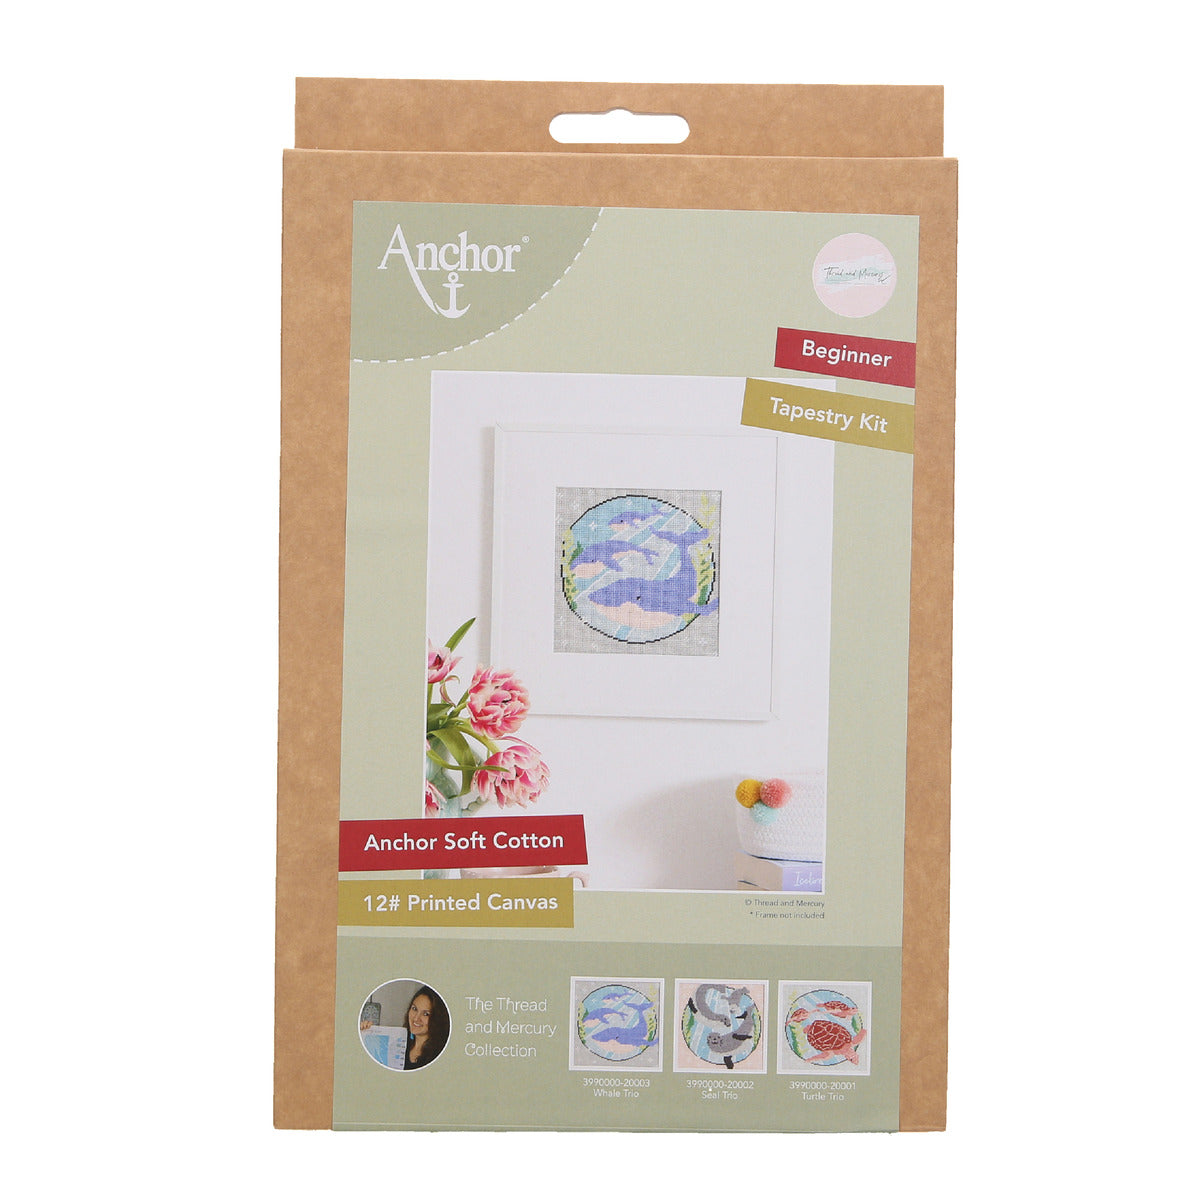 An image of the boxed anchor beginners tapestry kit featuring a trio of whales design